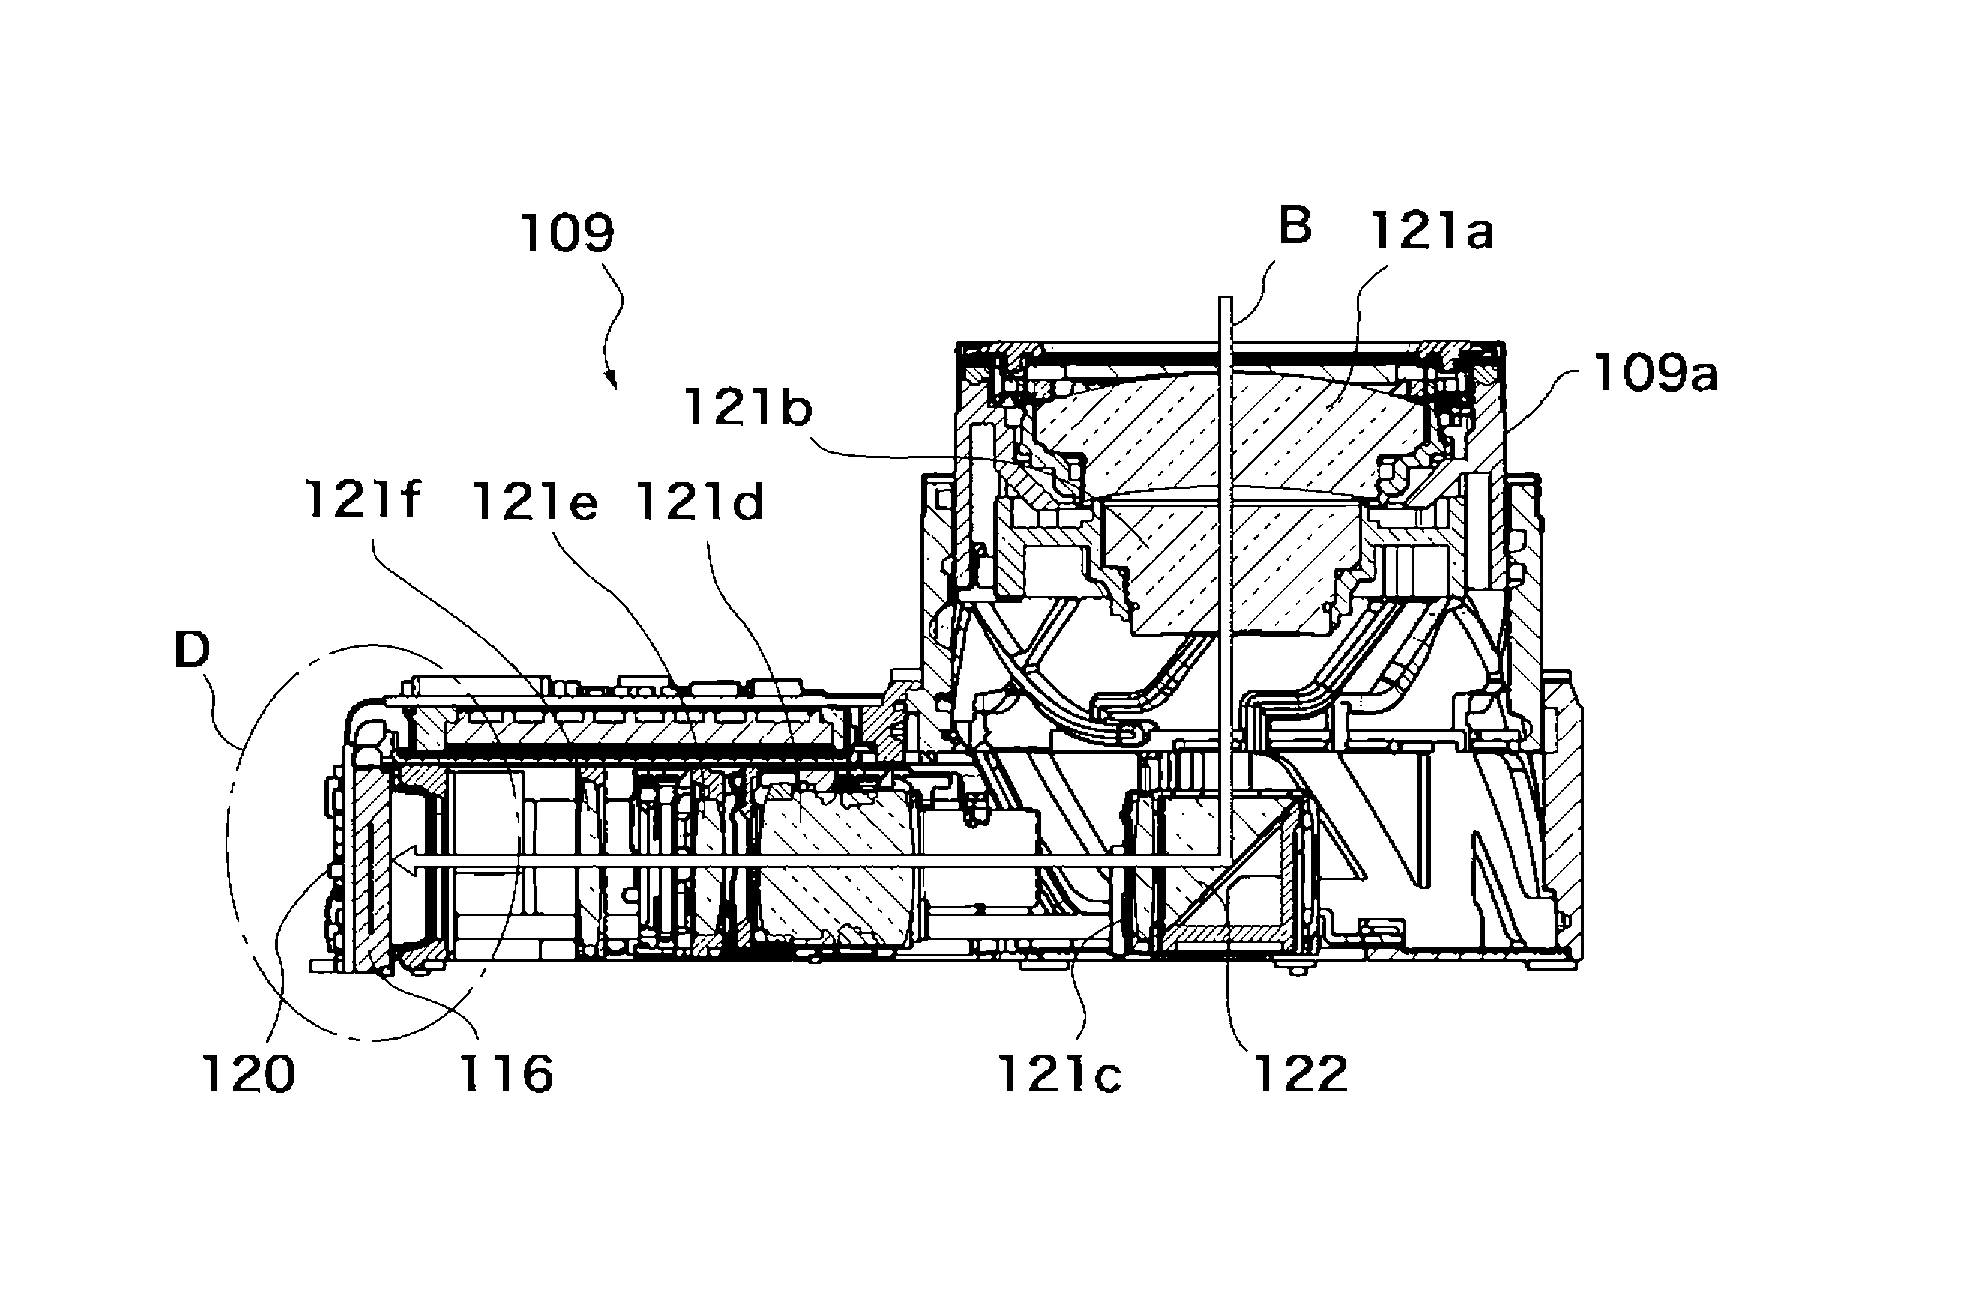 Image pickup apparatus capable of releasing heat efficiently